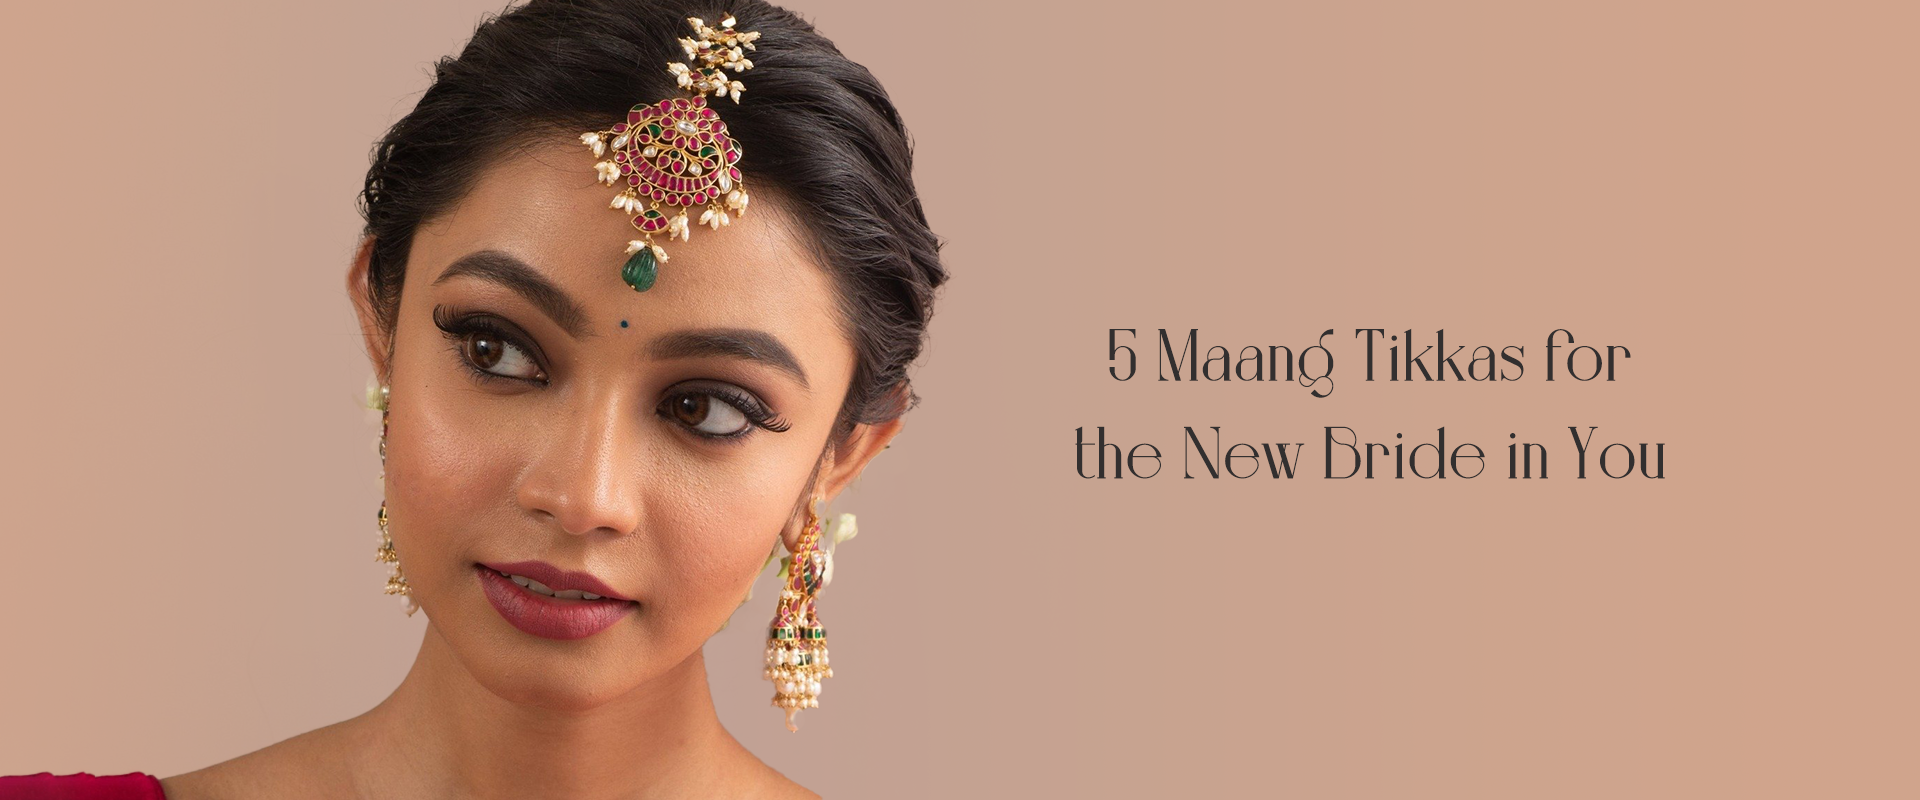 5 Maang Tikkas for the New Bride in You